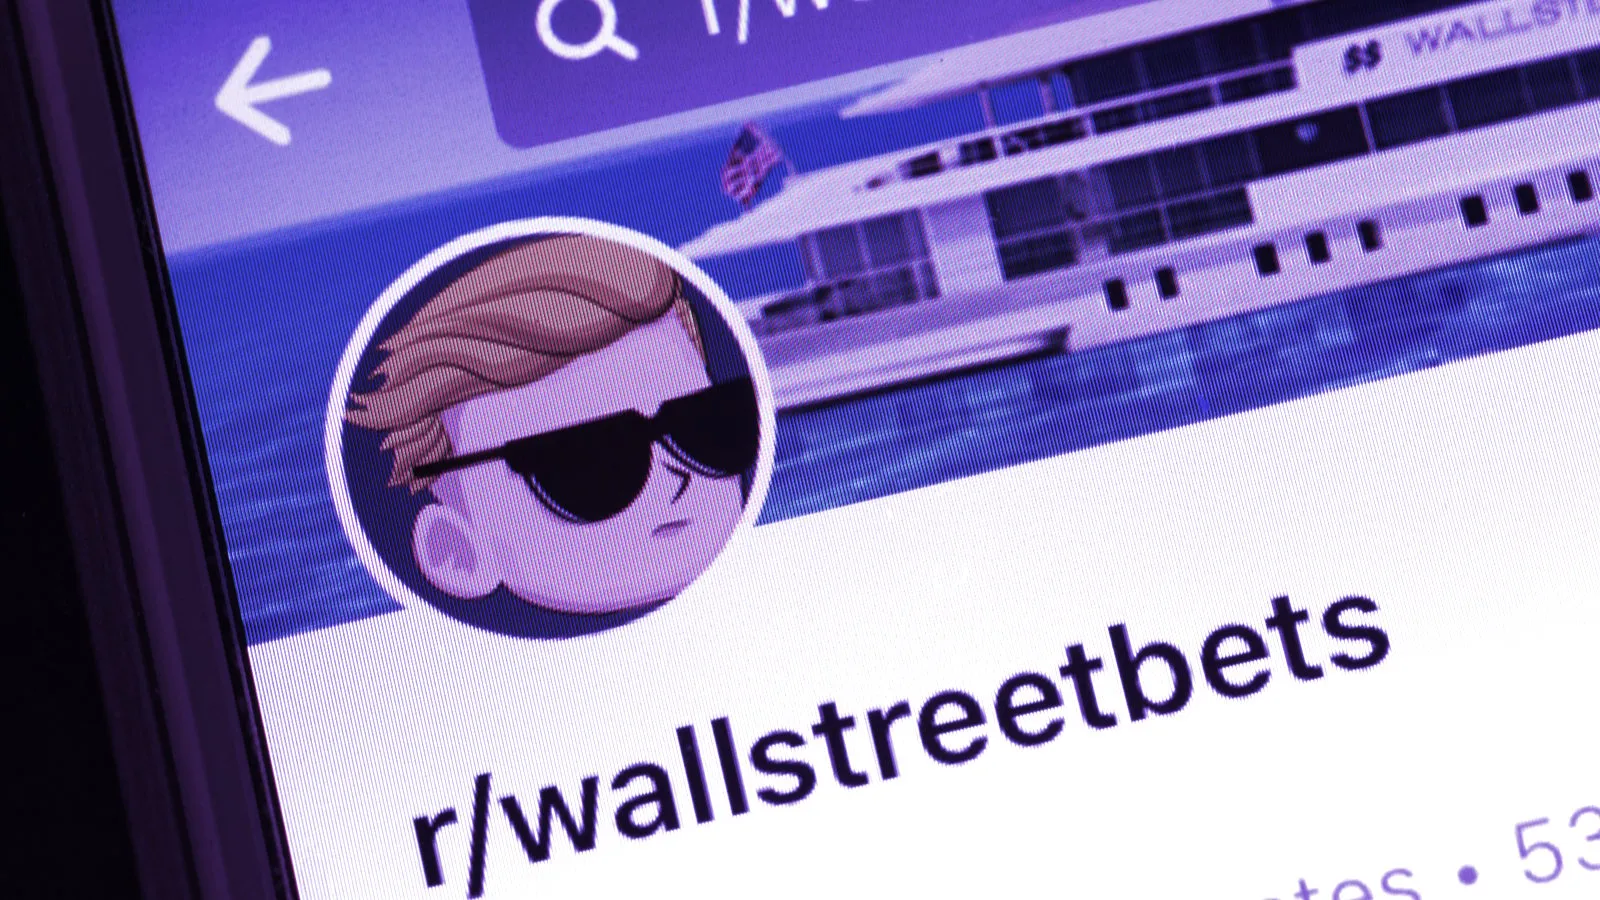 WallStreetBets Reddit Group: What Is It? - CoinDesk